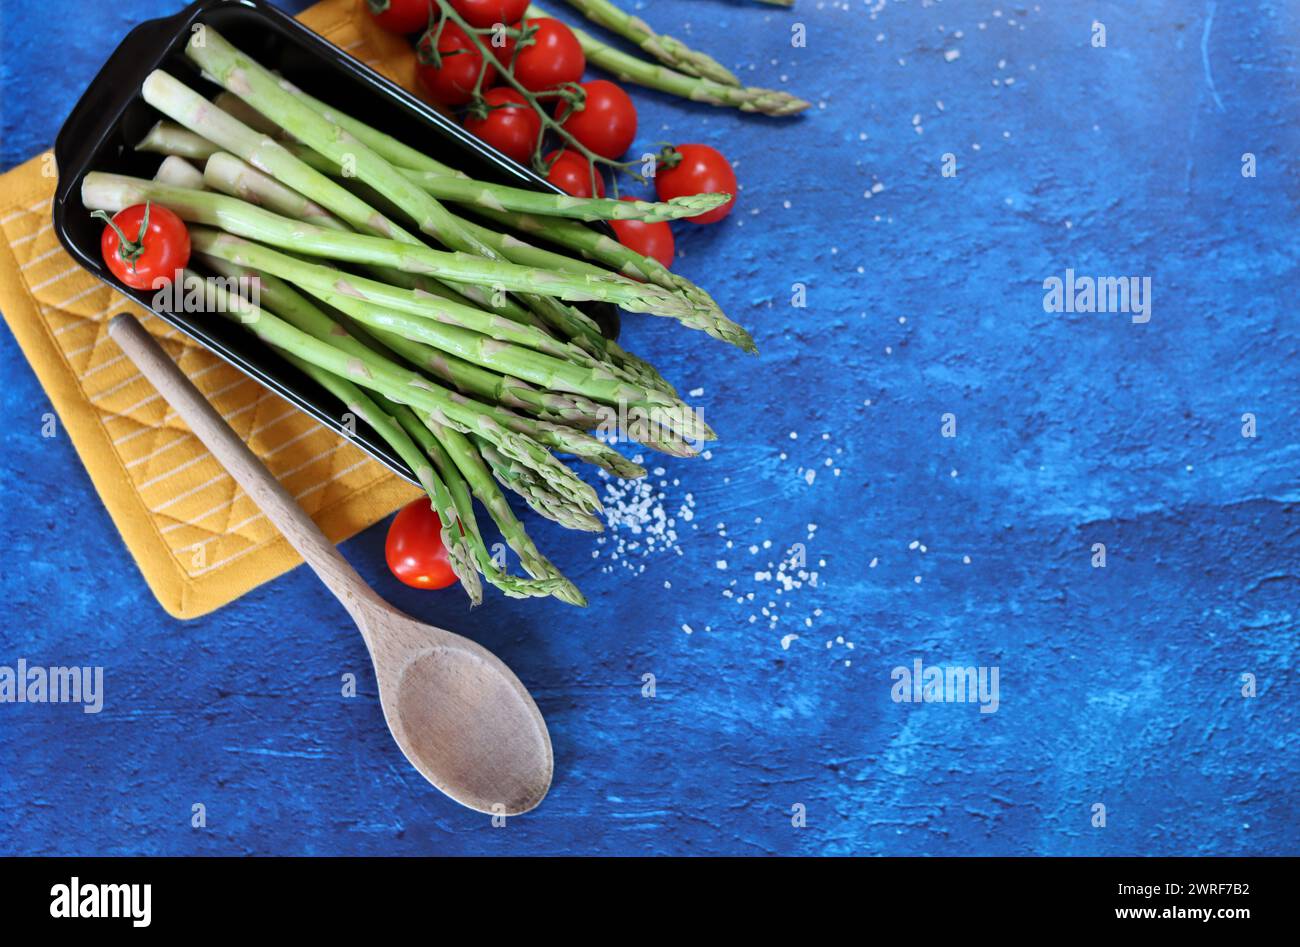 Fresh green asparagus and cherry tomatoes on blue textured background with copy space. healthy dinner preparation. Balanced diet concept. Stock Photo